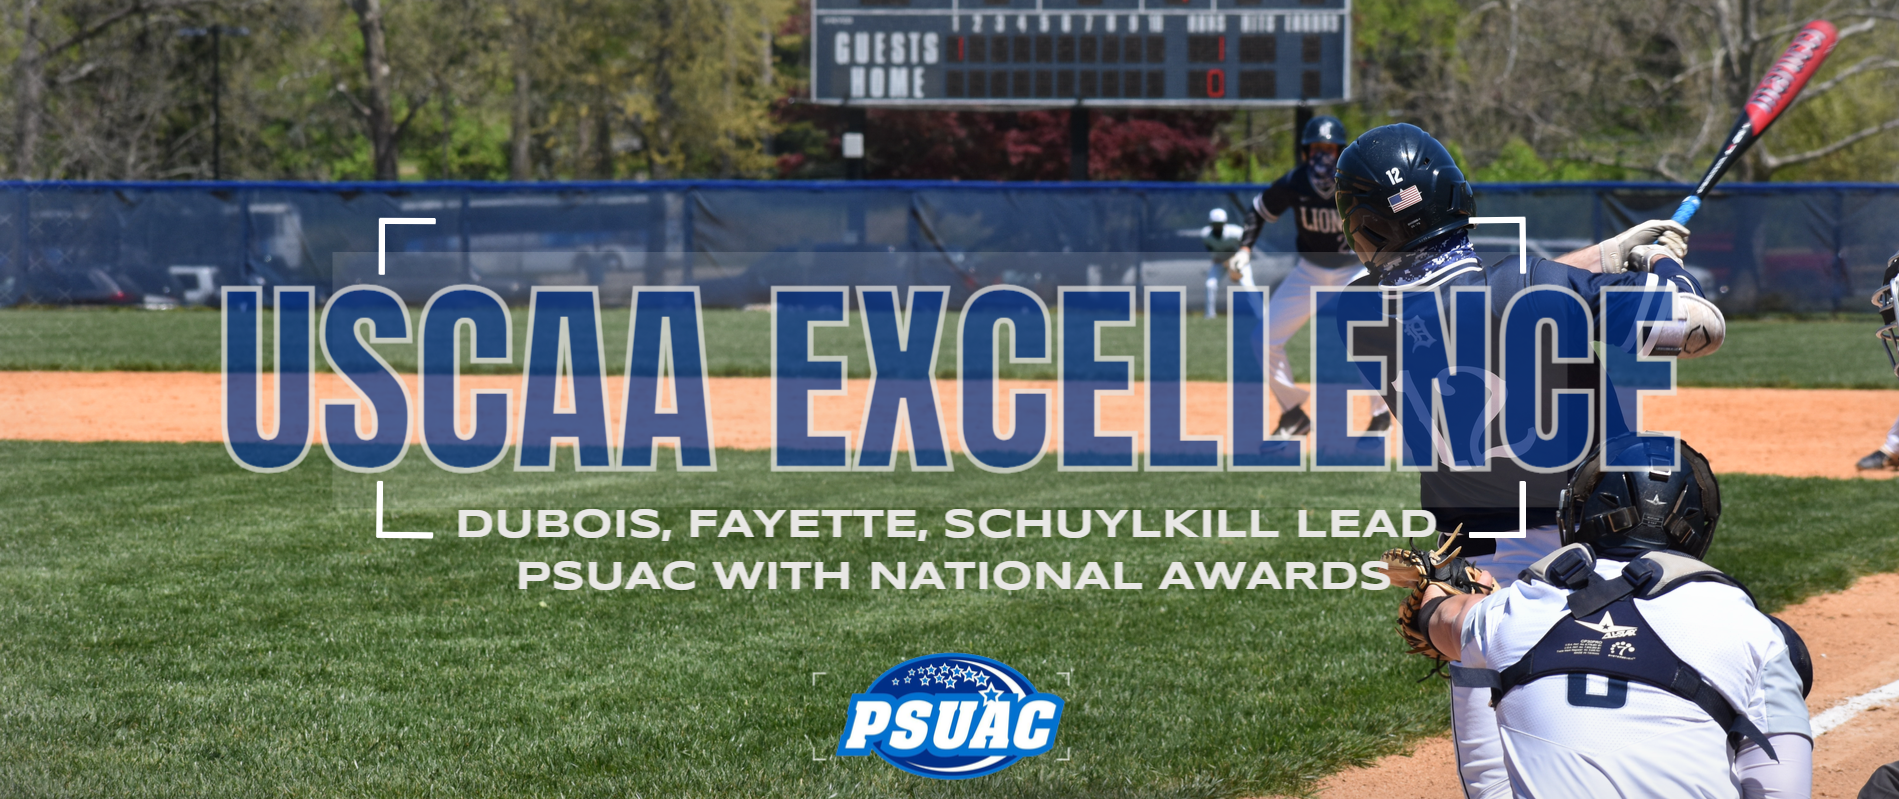 Penn State DuBois, Fayette and Schuylkill led the PSUAC with national awards from the USCAA given to member institutions for outstanding performance over the past year.